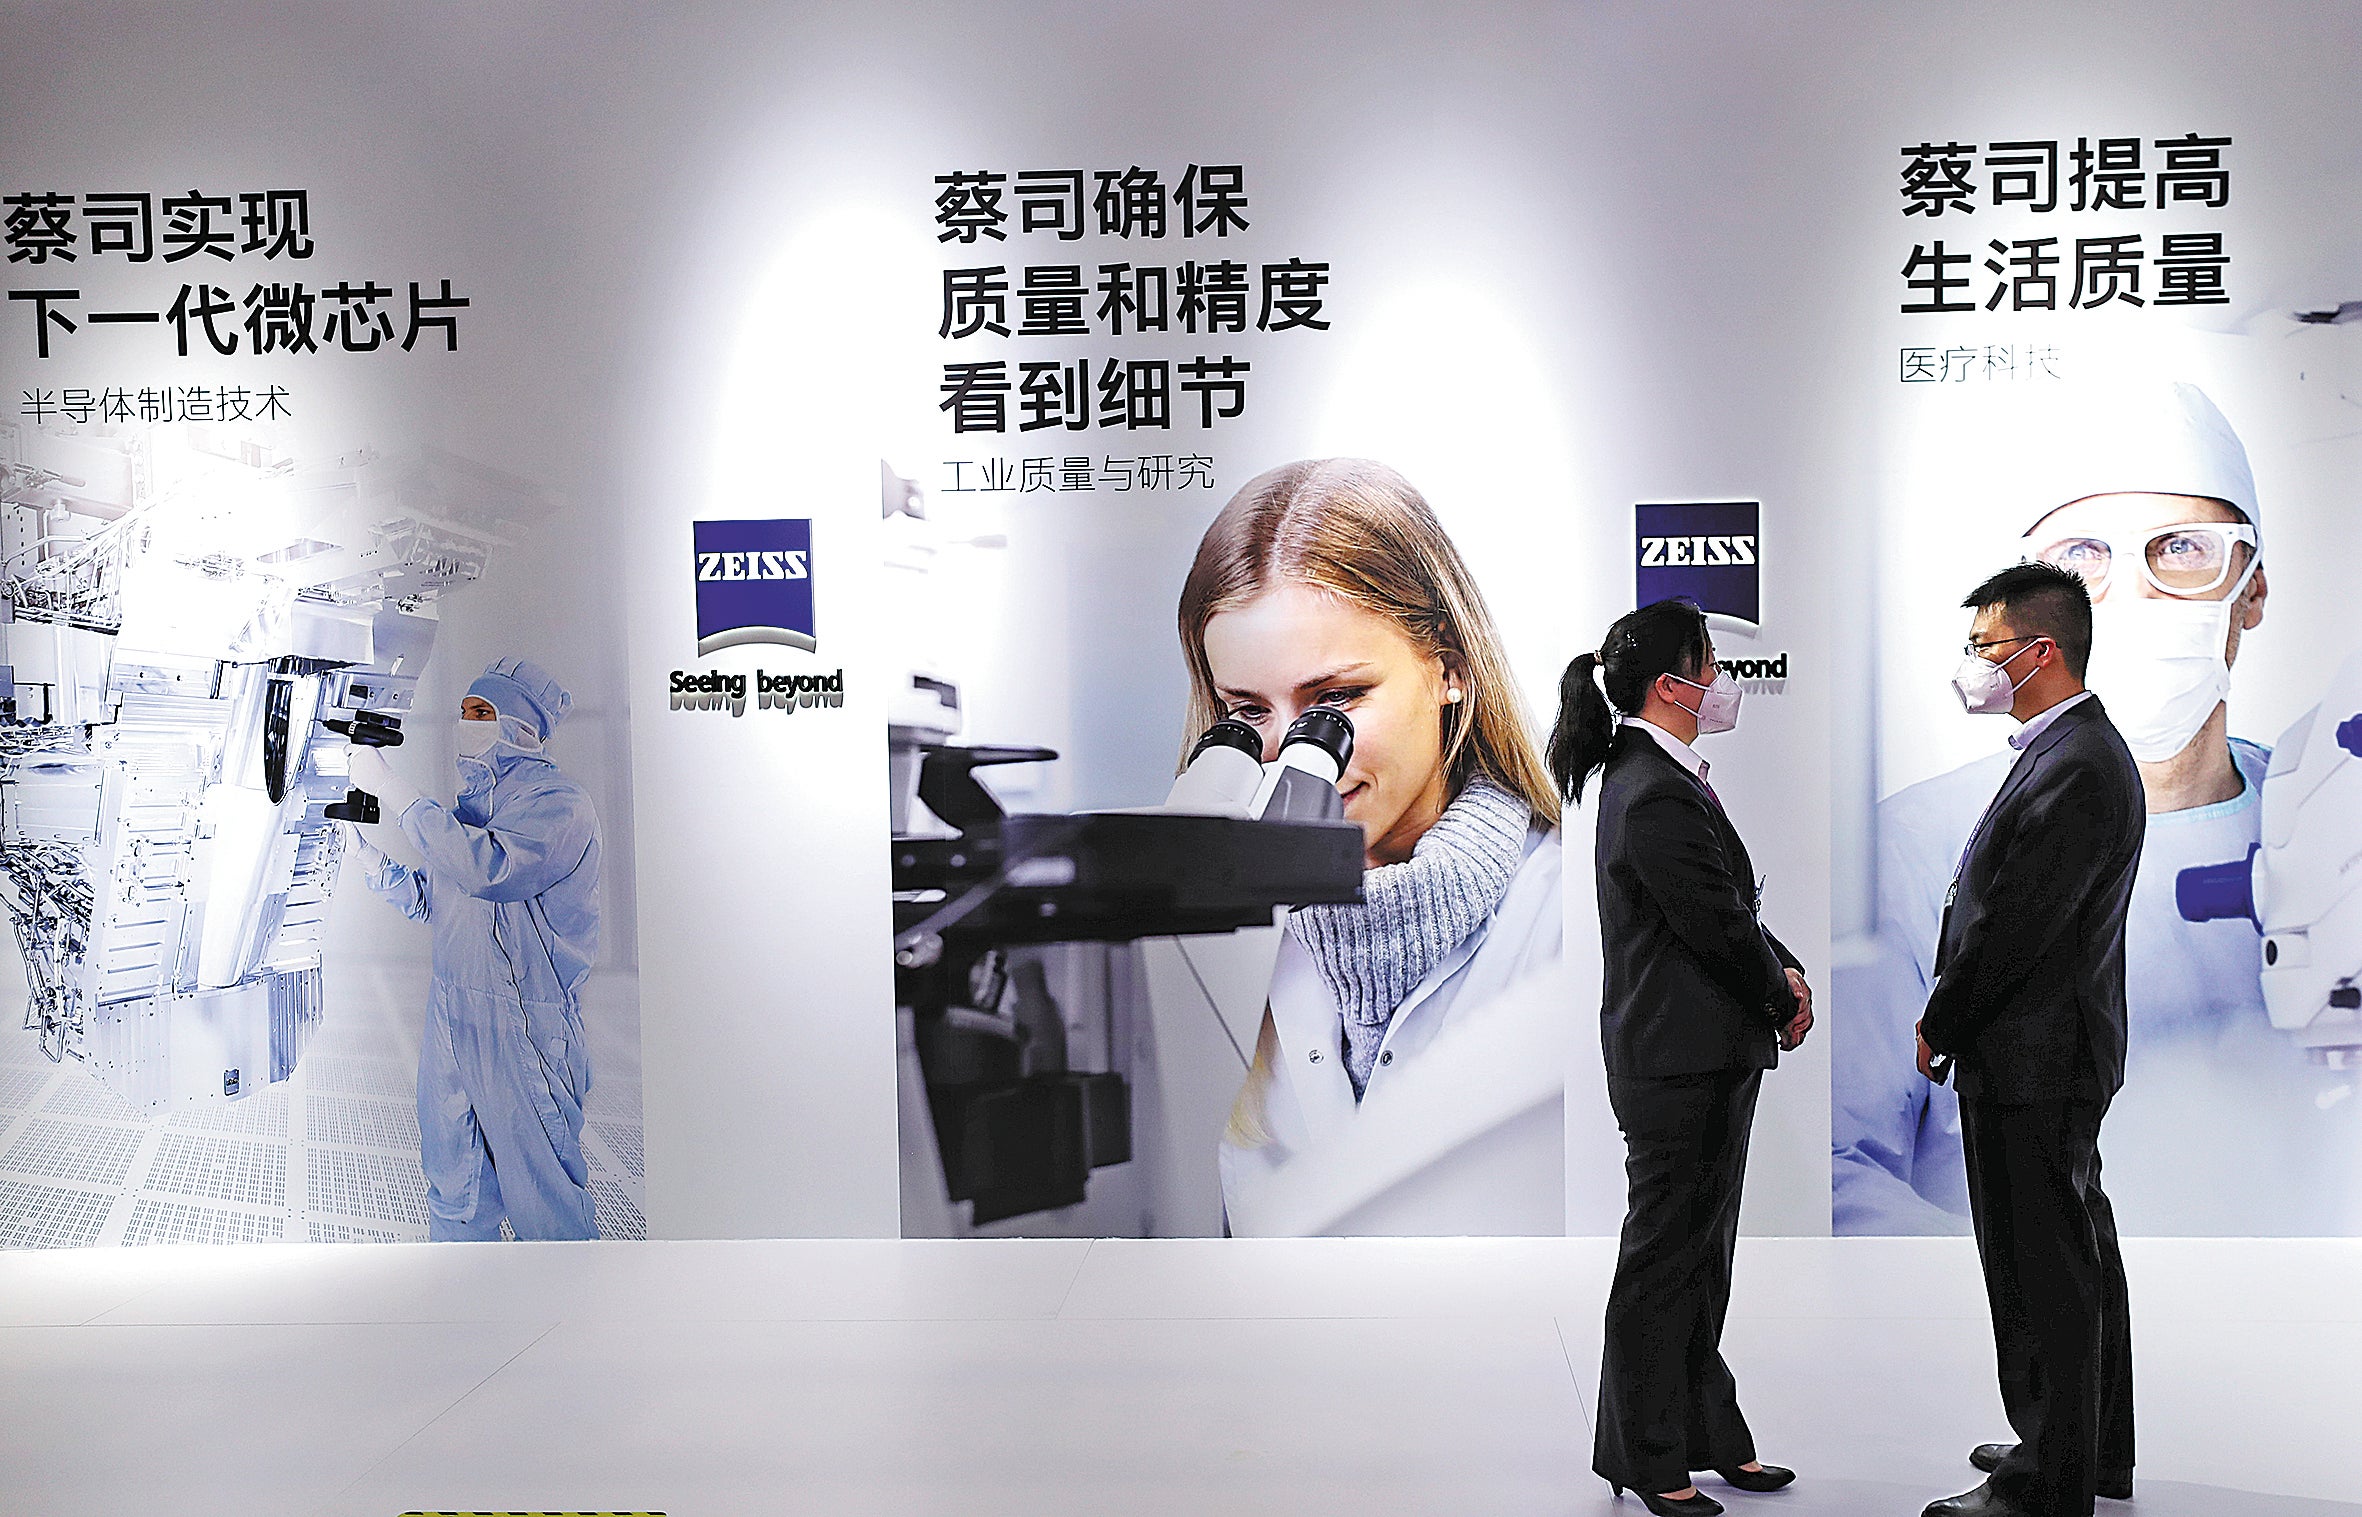 The booth of German technology company Zeiss at the expo